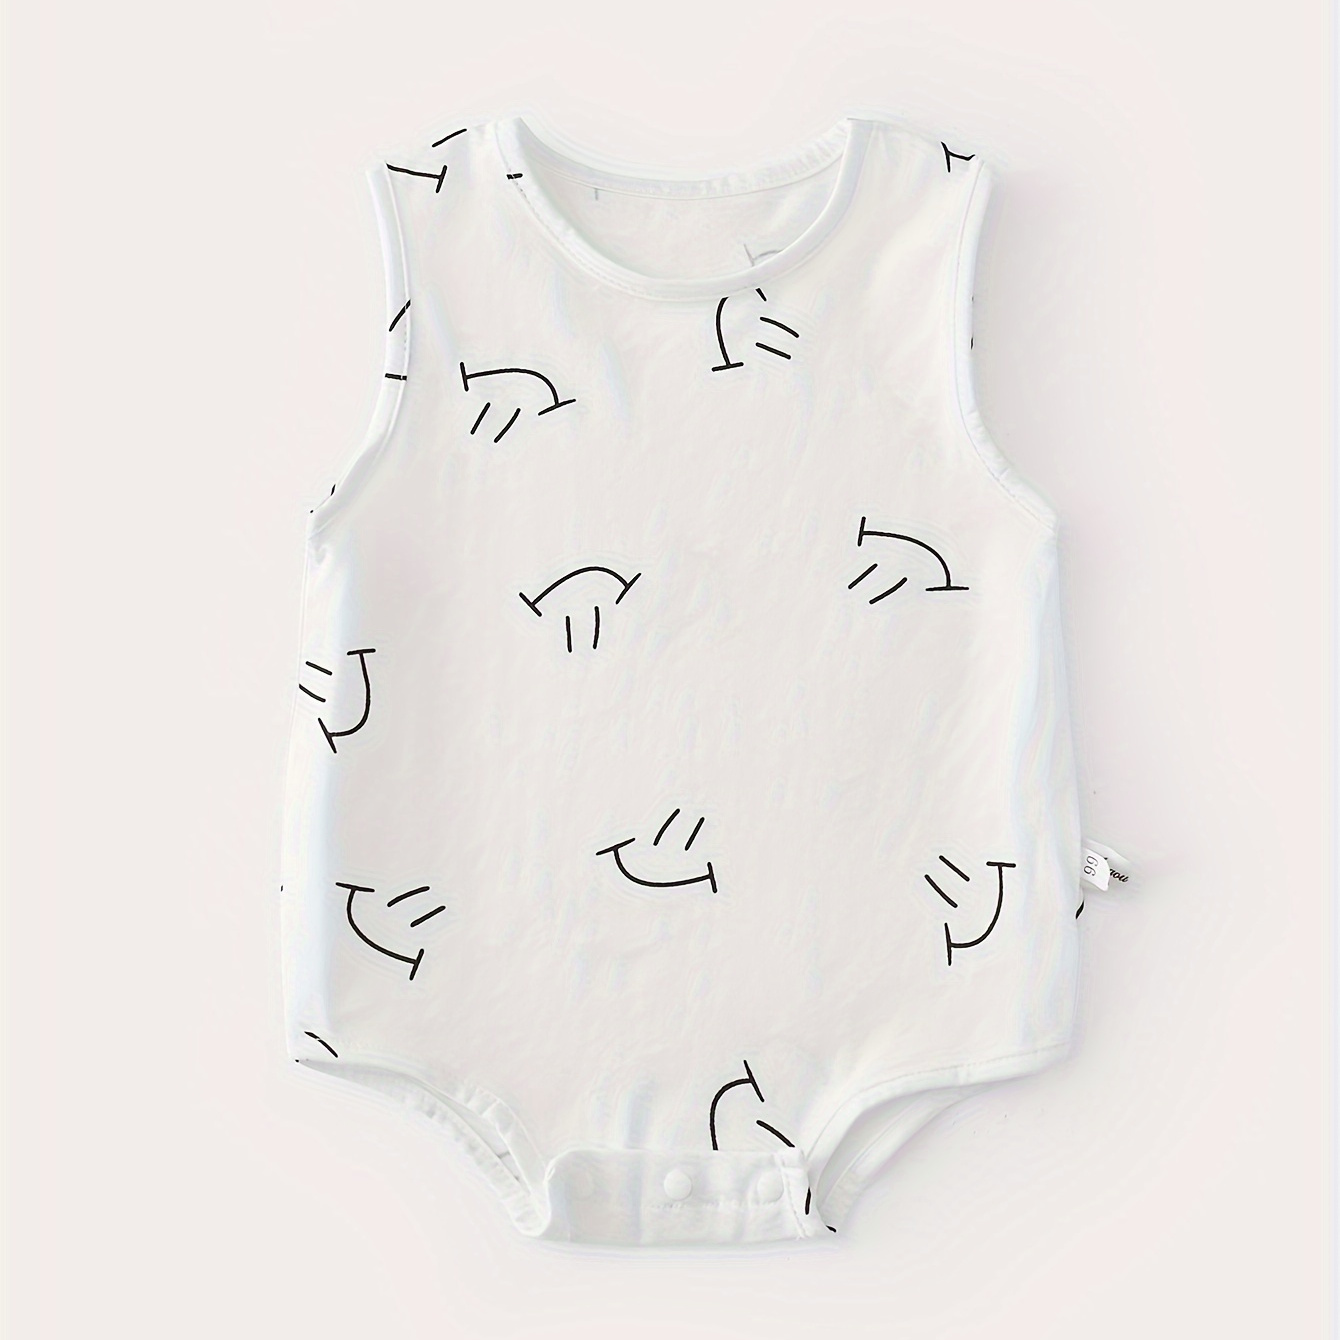 

Infant's Happy Face Allover Print Cotton Bodysuit, Comfy Summer Sleeveless Onesie, Baby Boy's Clothing, As Gift